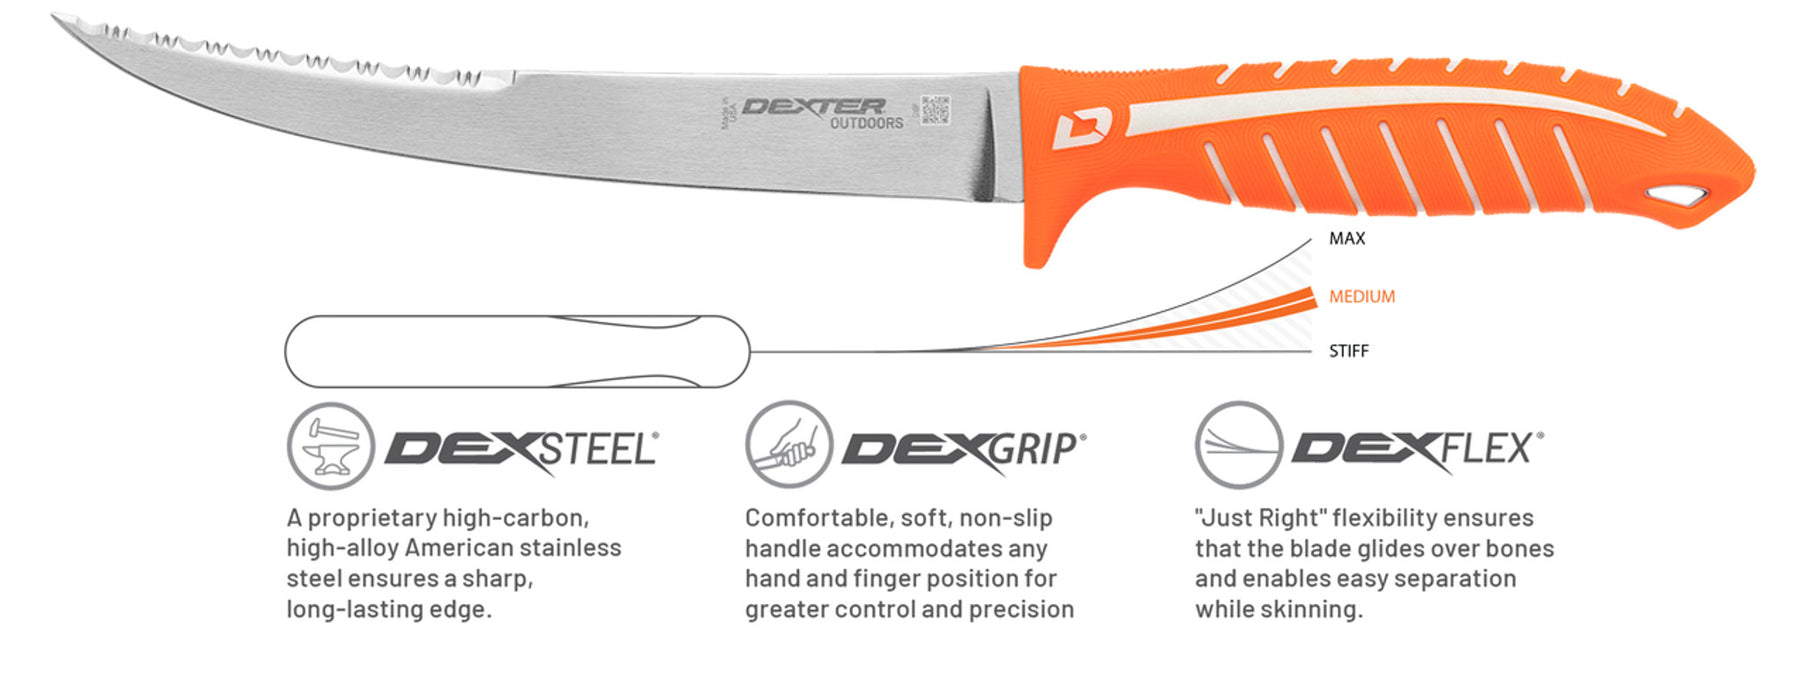 Dexter Outdoors DEXTREME Dual Edge 8" Flexible Fillet Knife with Sheath